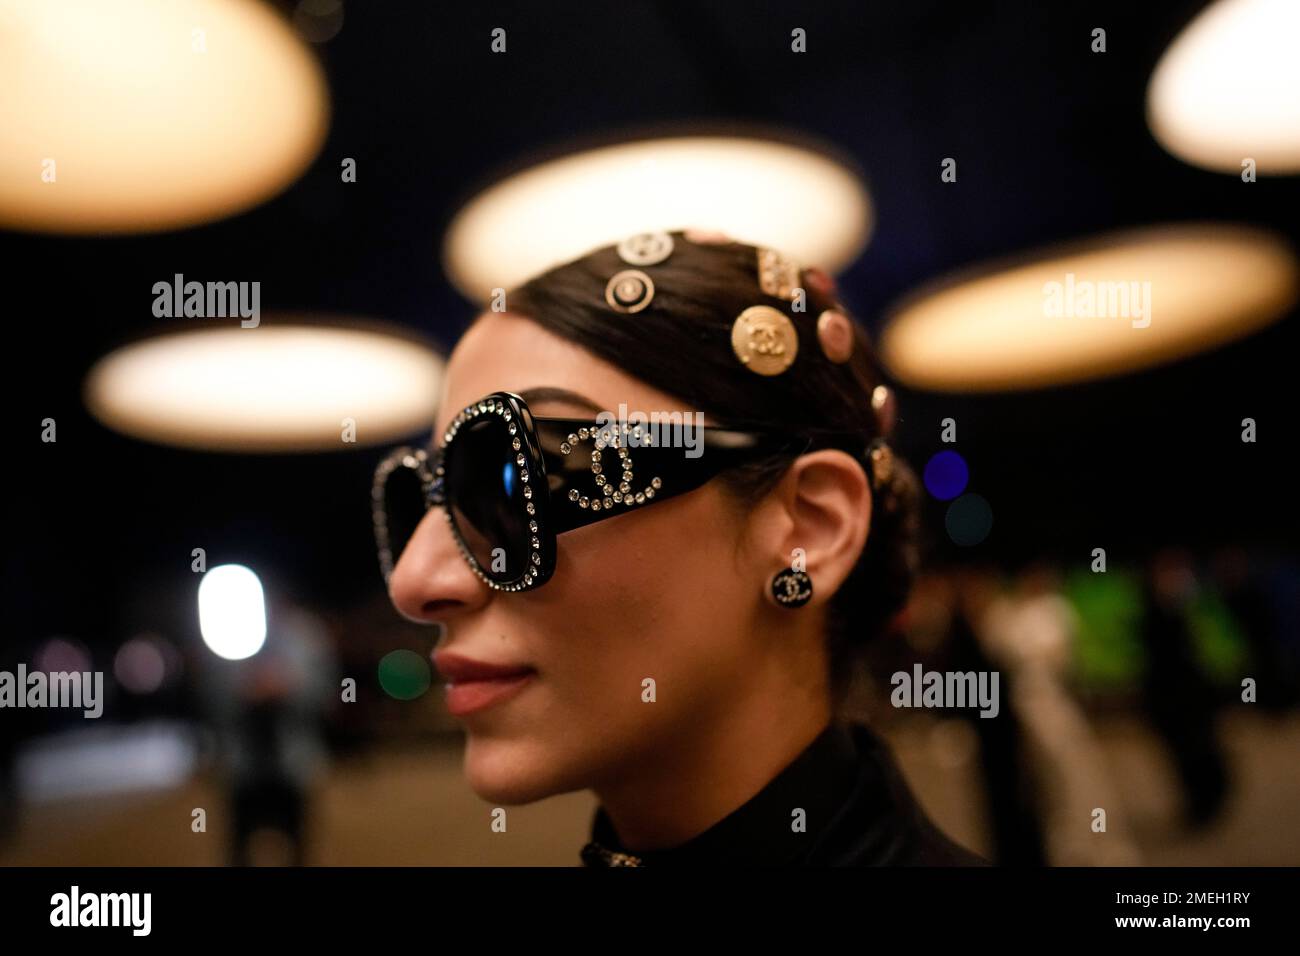 An audience member with Chanel logos on their hat and sunglasses